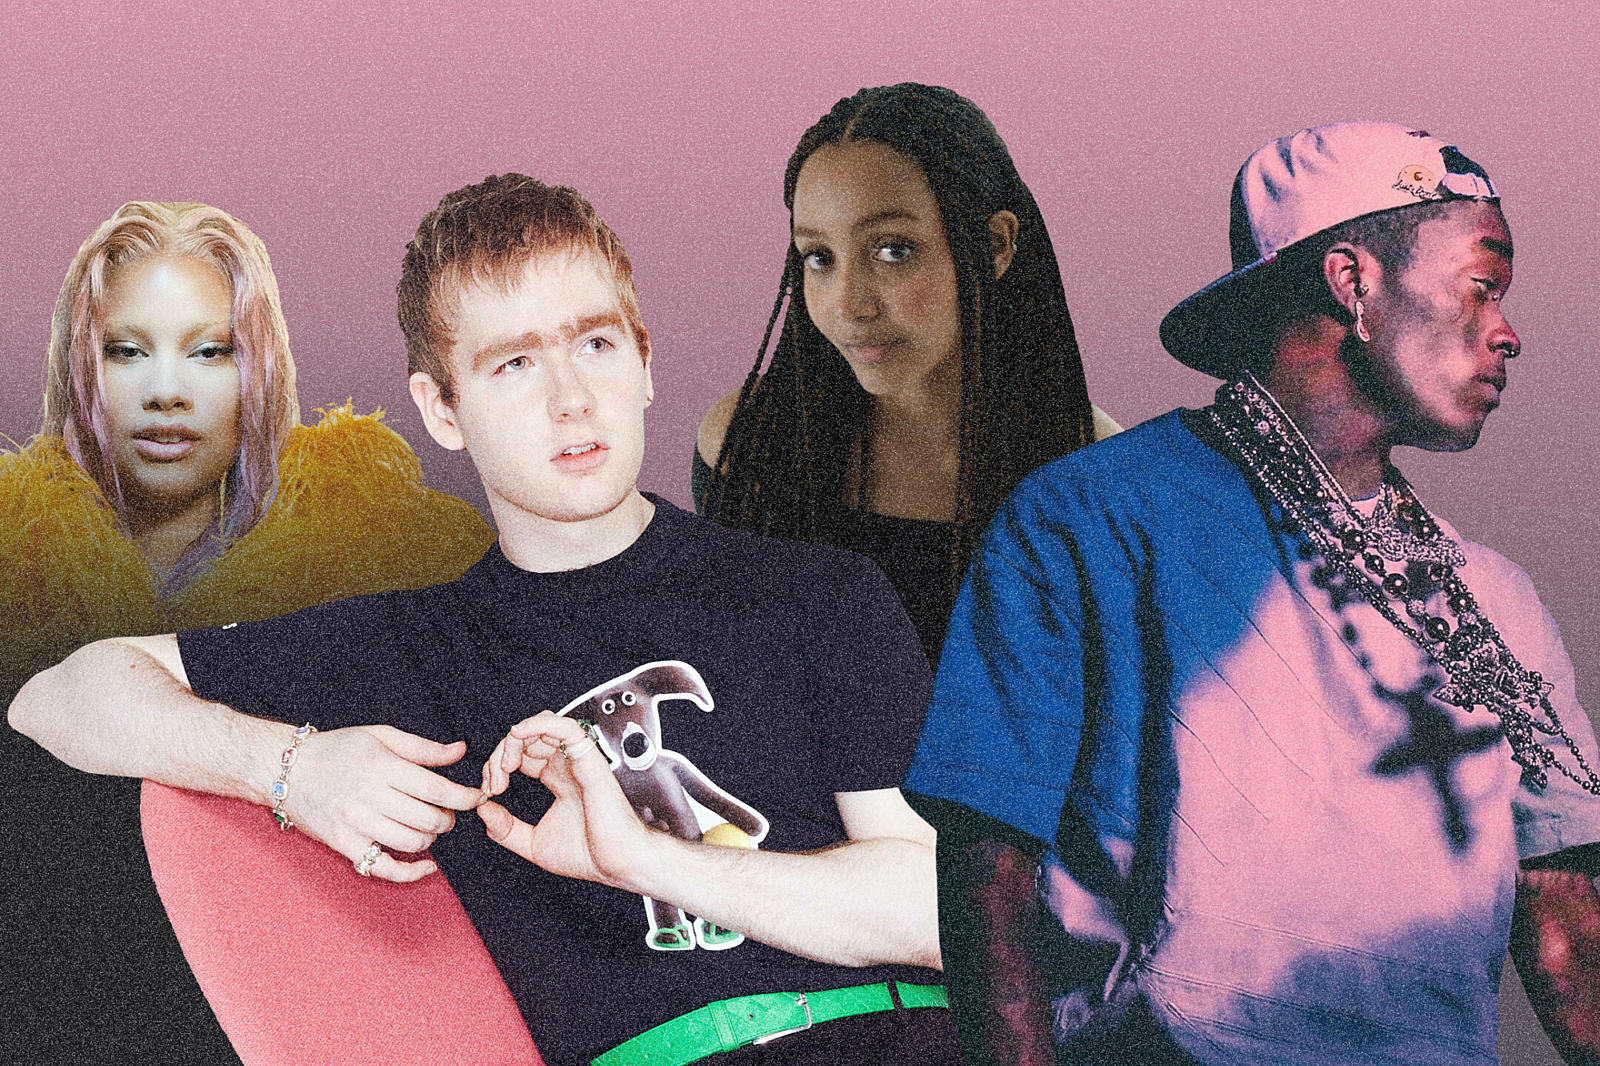 Mura Masa links up with Lil Uzi Vert, PinkPantheress and Shygirl for 'bbycakes'